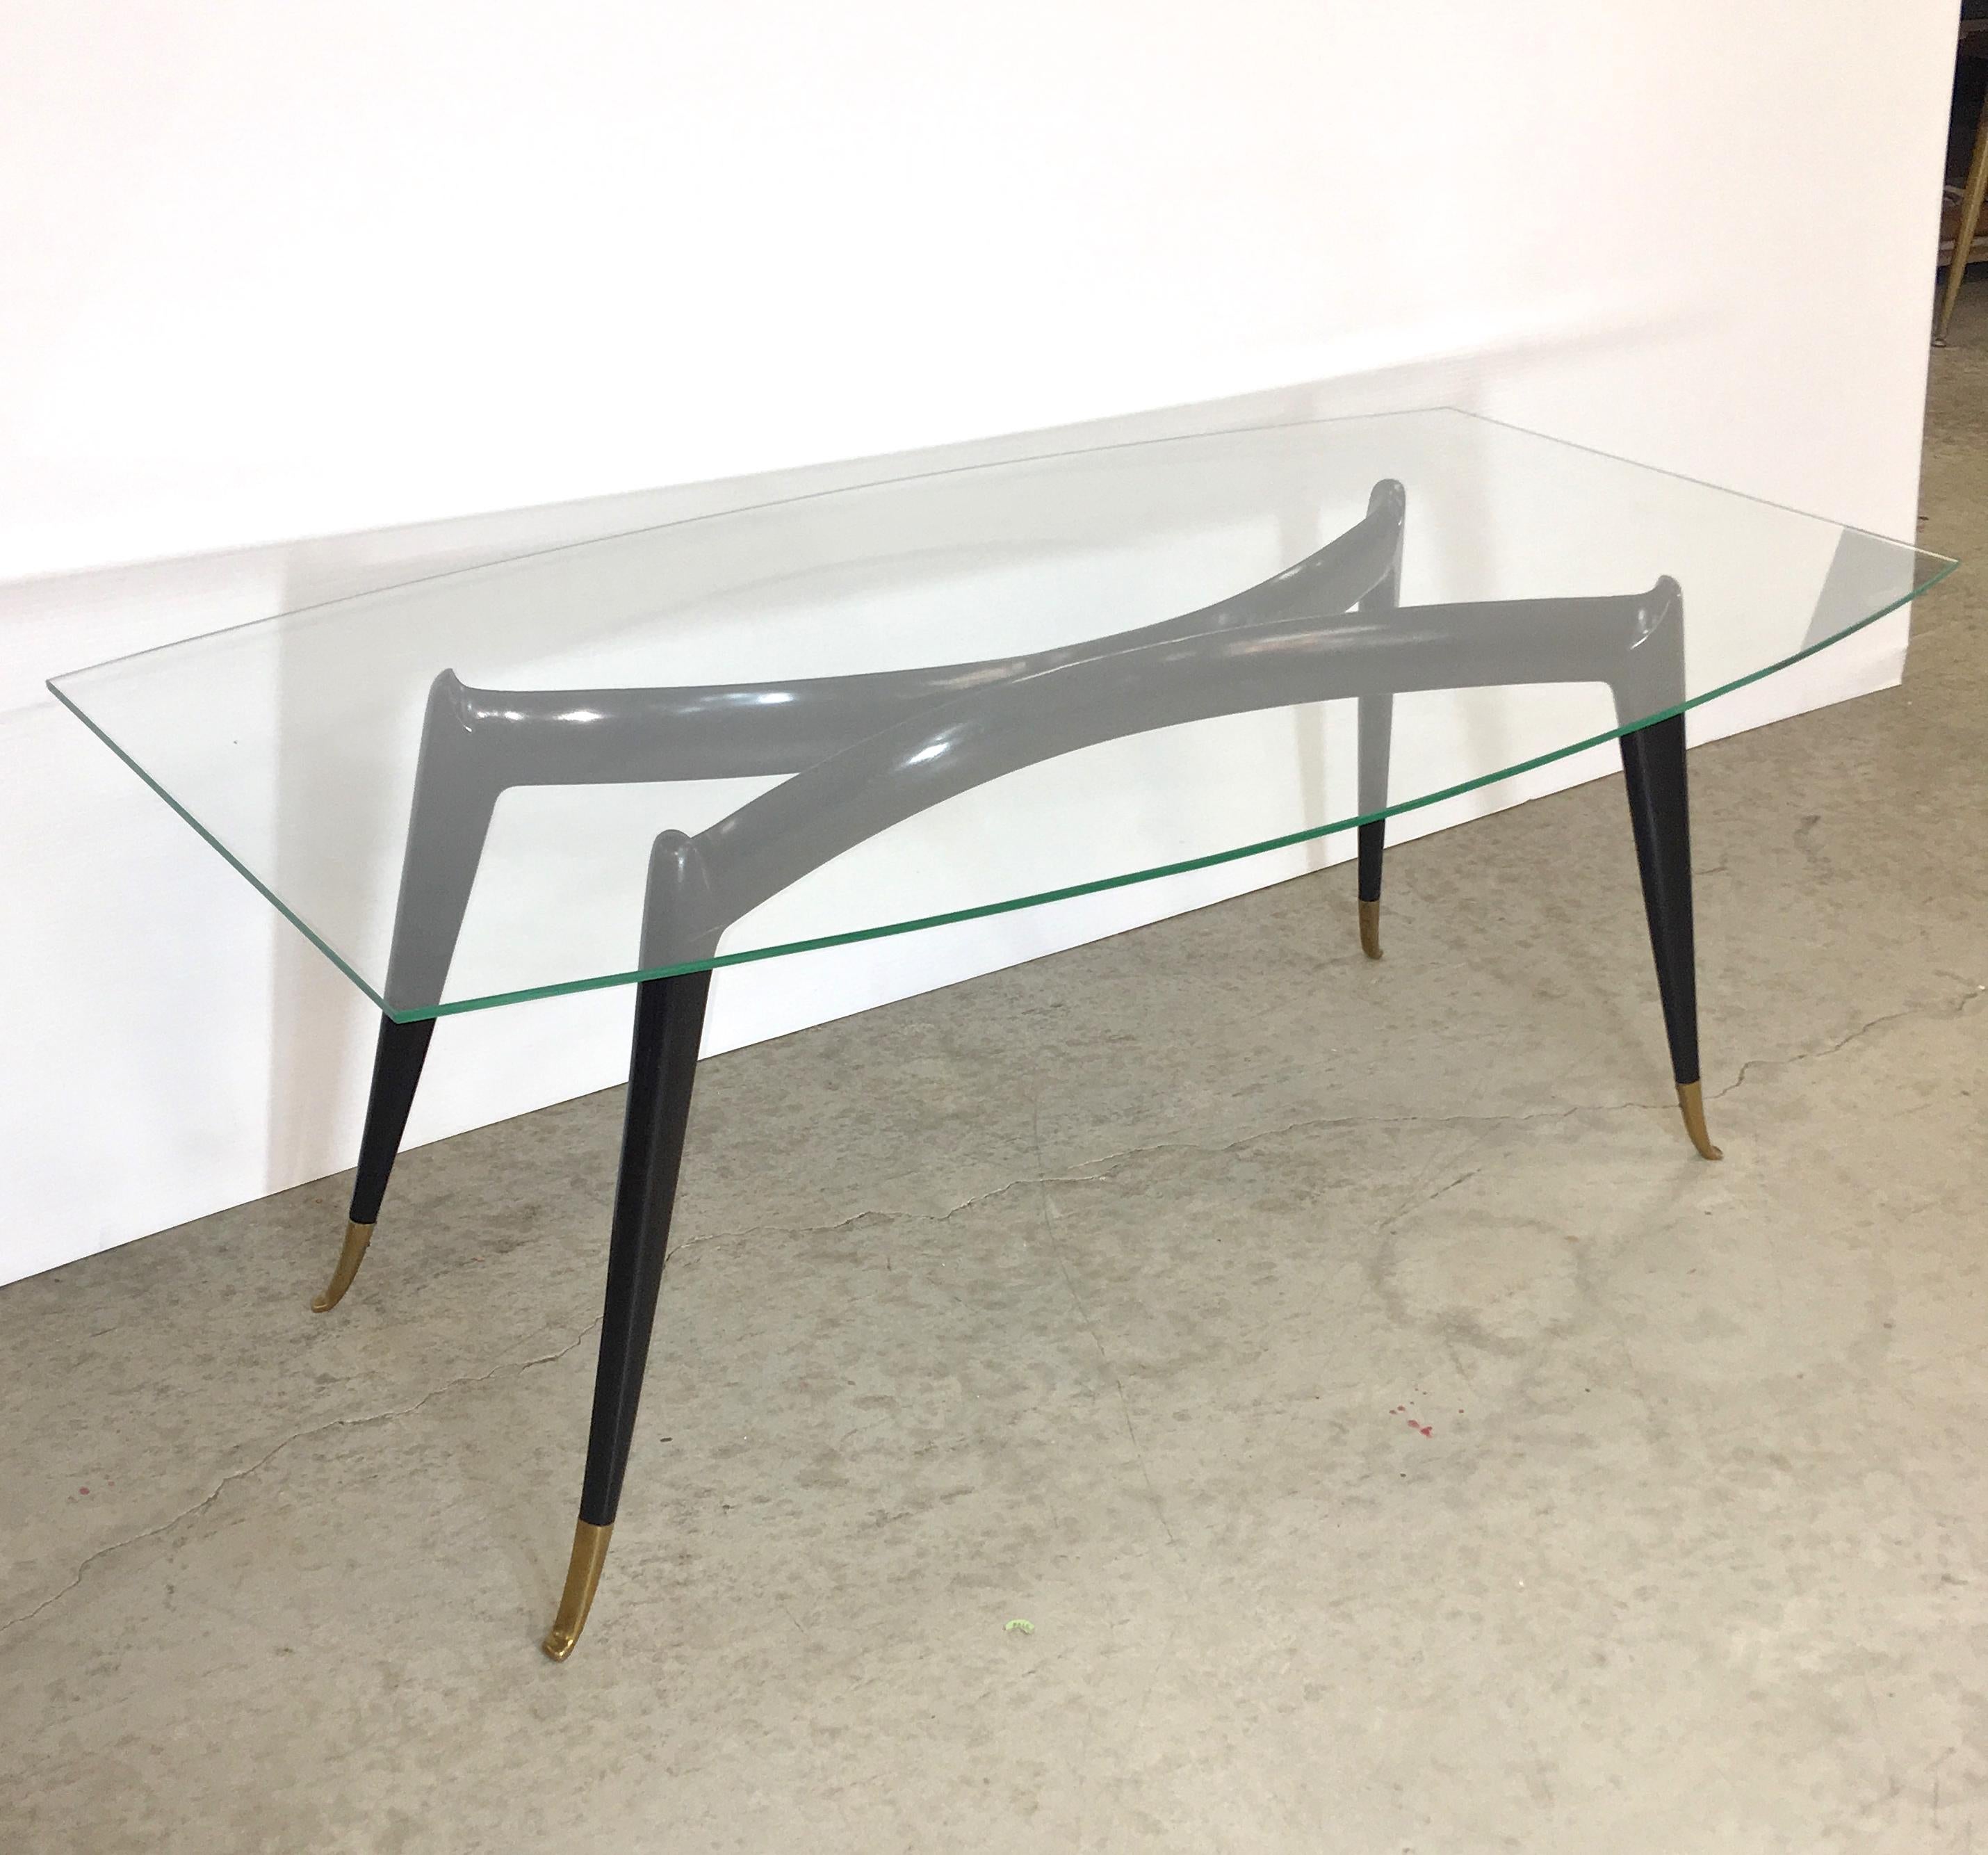 1950's Italian coffee table attributed to Guglielmo Ulrich. 
Ebonized mahogany and solid brass sabots, 
Boat shaped glass top 46 inches by 25 inches.
Table base dimensions without glass 18.5 inches high by 39 wide x 16 deep, toe to toe.
For a